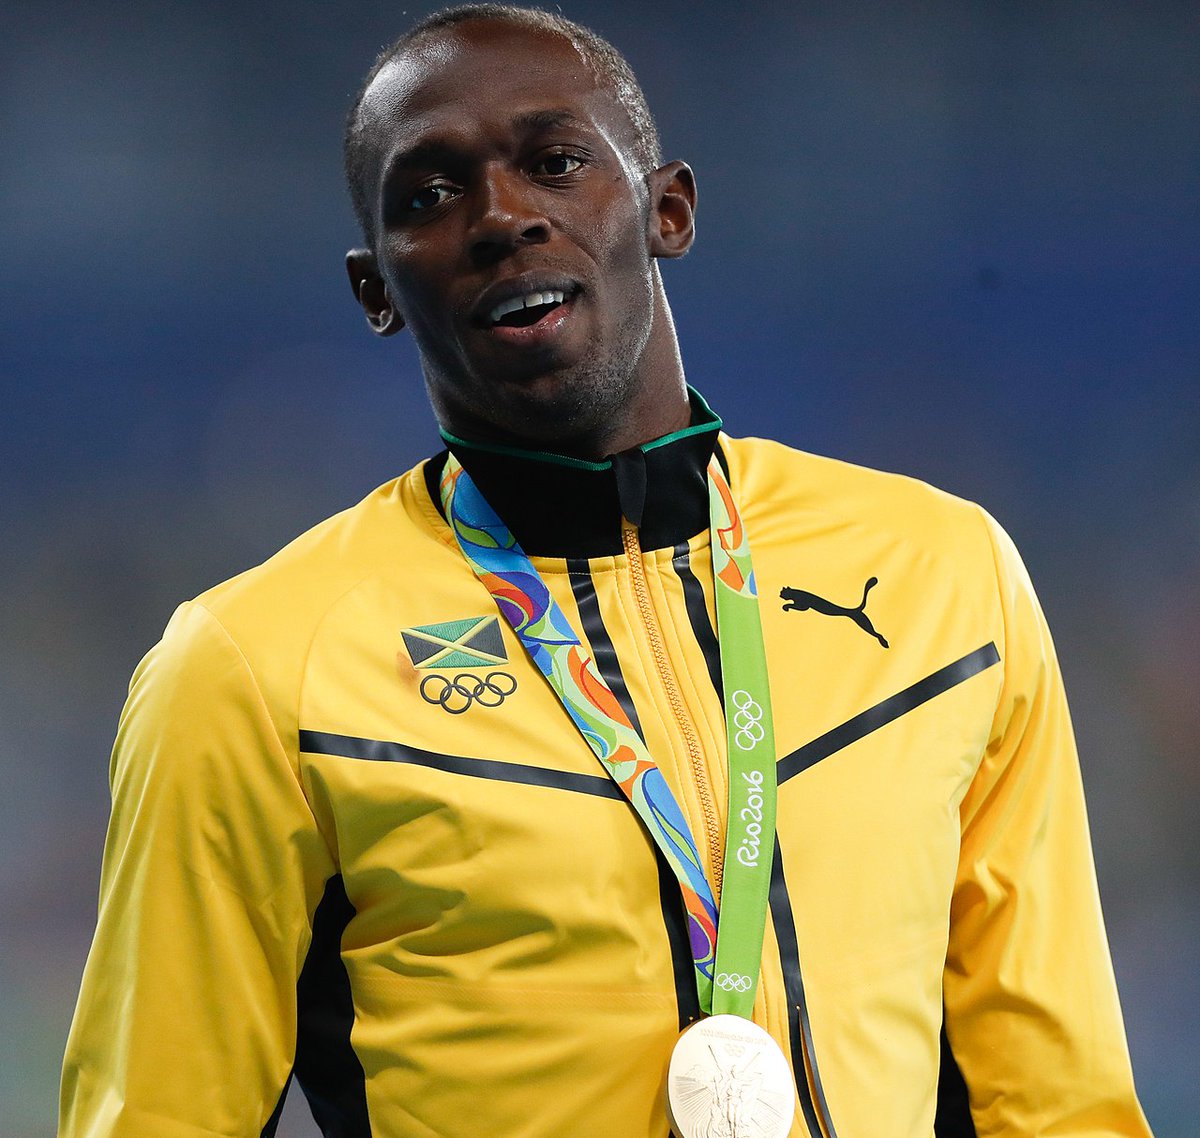 The  #Jamaican  #olympic  #athlete  #UsainBolt  (+) to  #COVID19  #CoronaVirusUpdates  #sports  #deportes  #coronavirus  #pandemia considered the greatest sprintrr of all times n world record holter of 100m 200m , 4x 100m relay #BREAKING  #BreakingNews https://twitter.com/spectatorindex/status/1298105817753743360?s=19